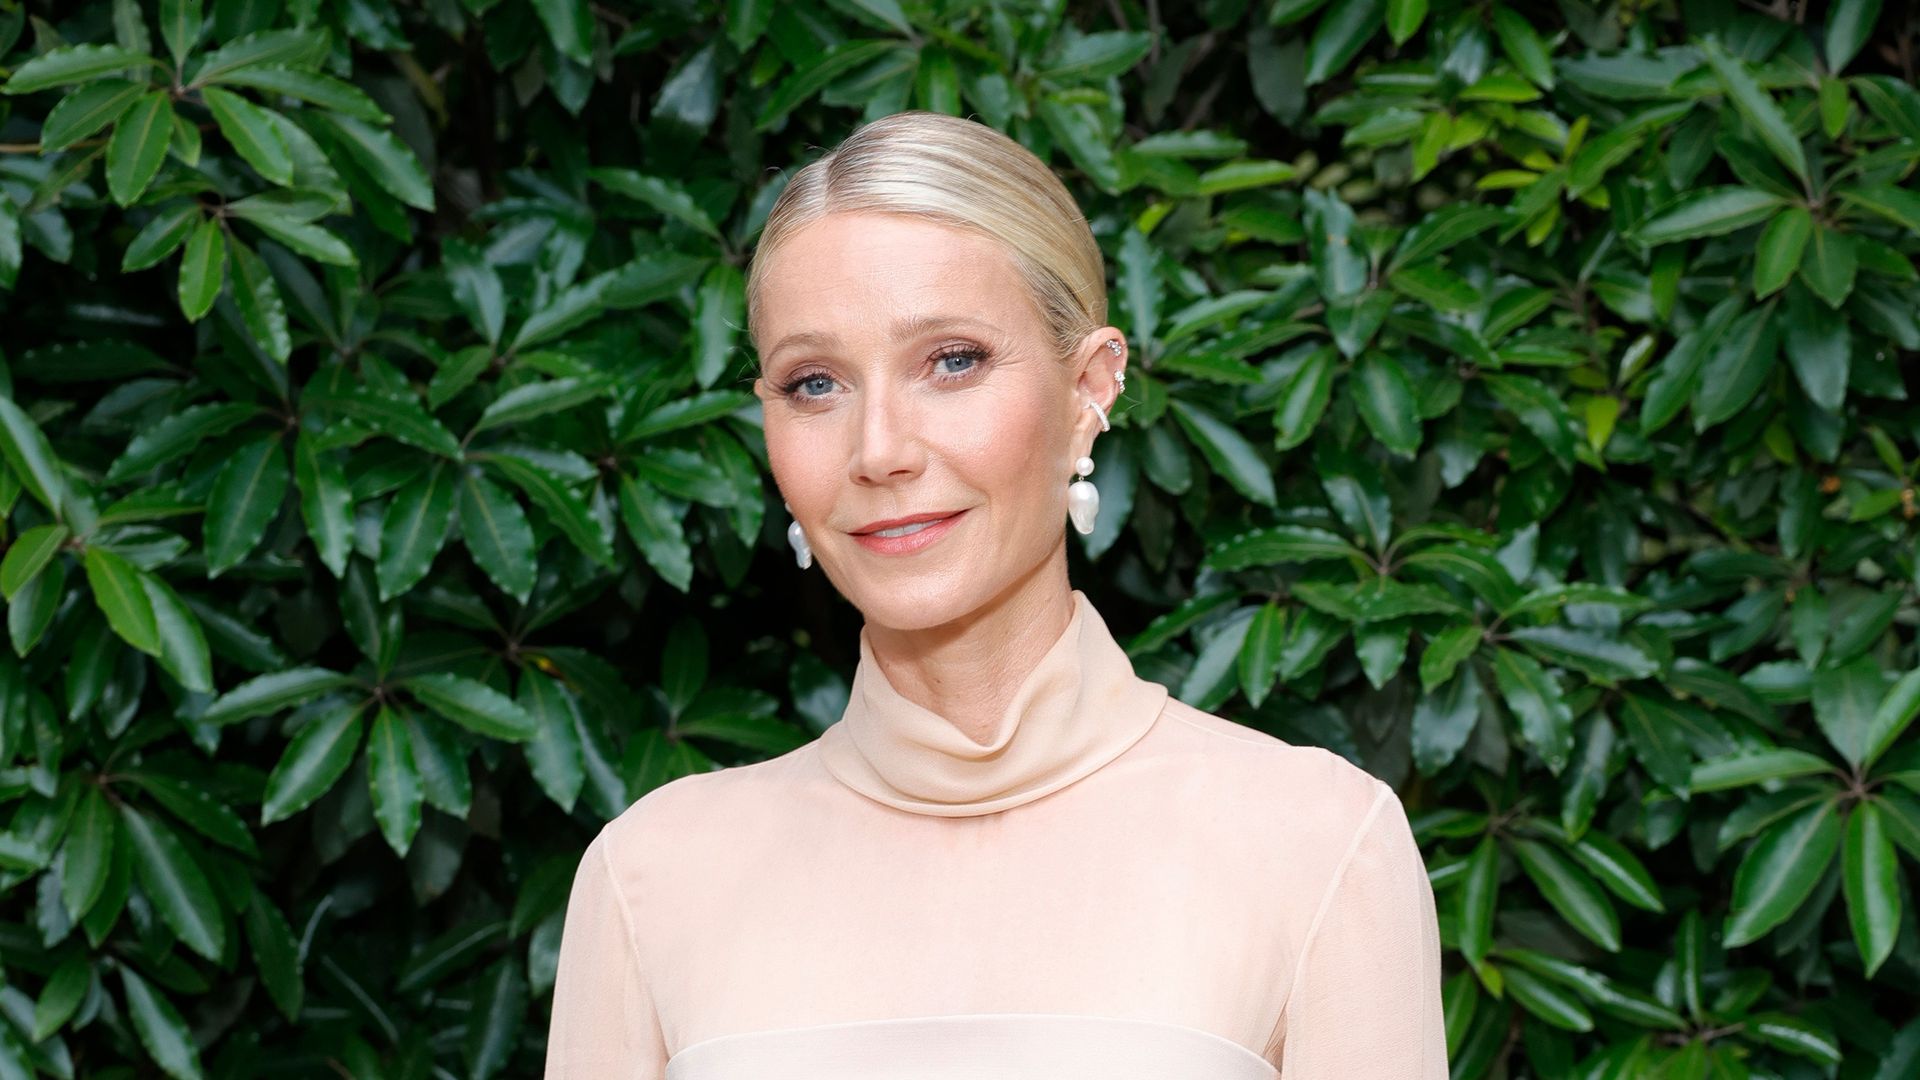 Gwyneth Paltrow's children Apple and Moses tower over her in star-studded photo ahead of family's emotional change